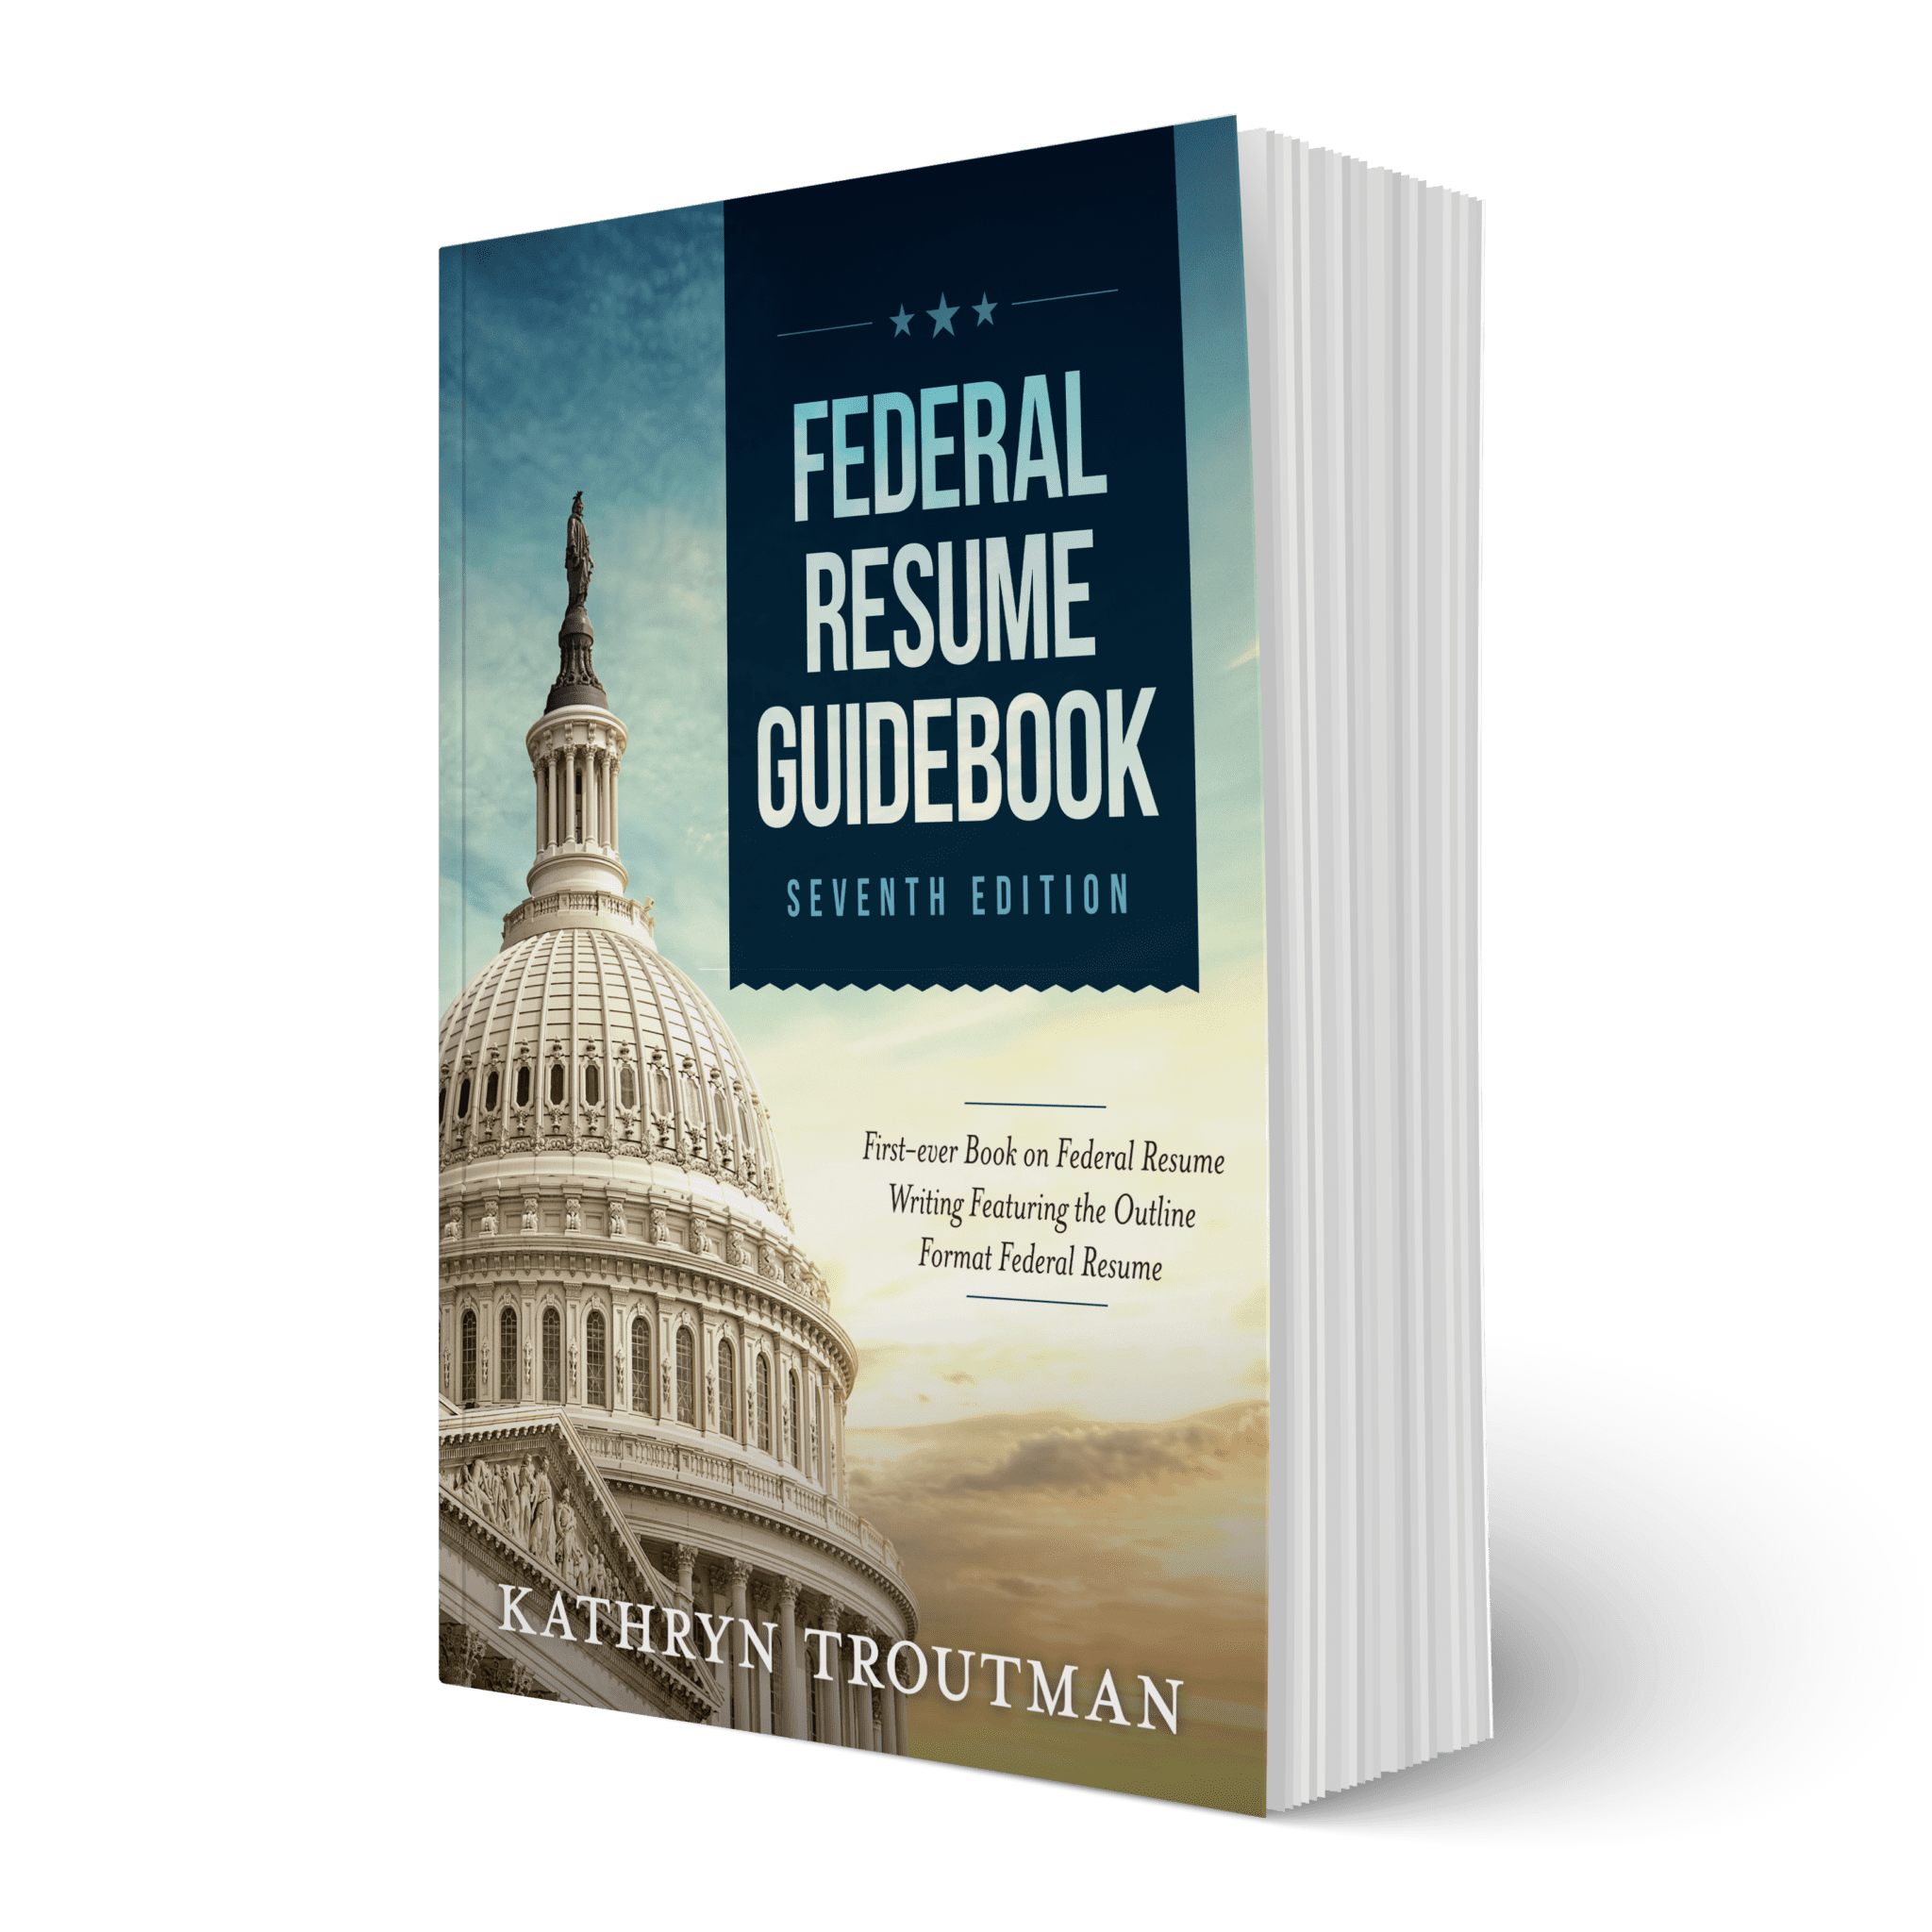 Federal Resume Guidebook, 7th Edition Resume Place